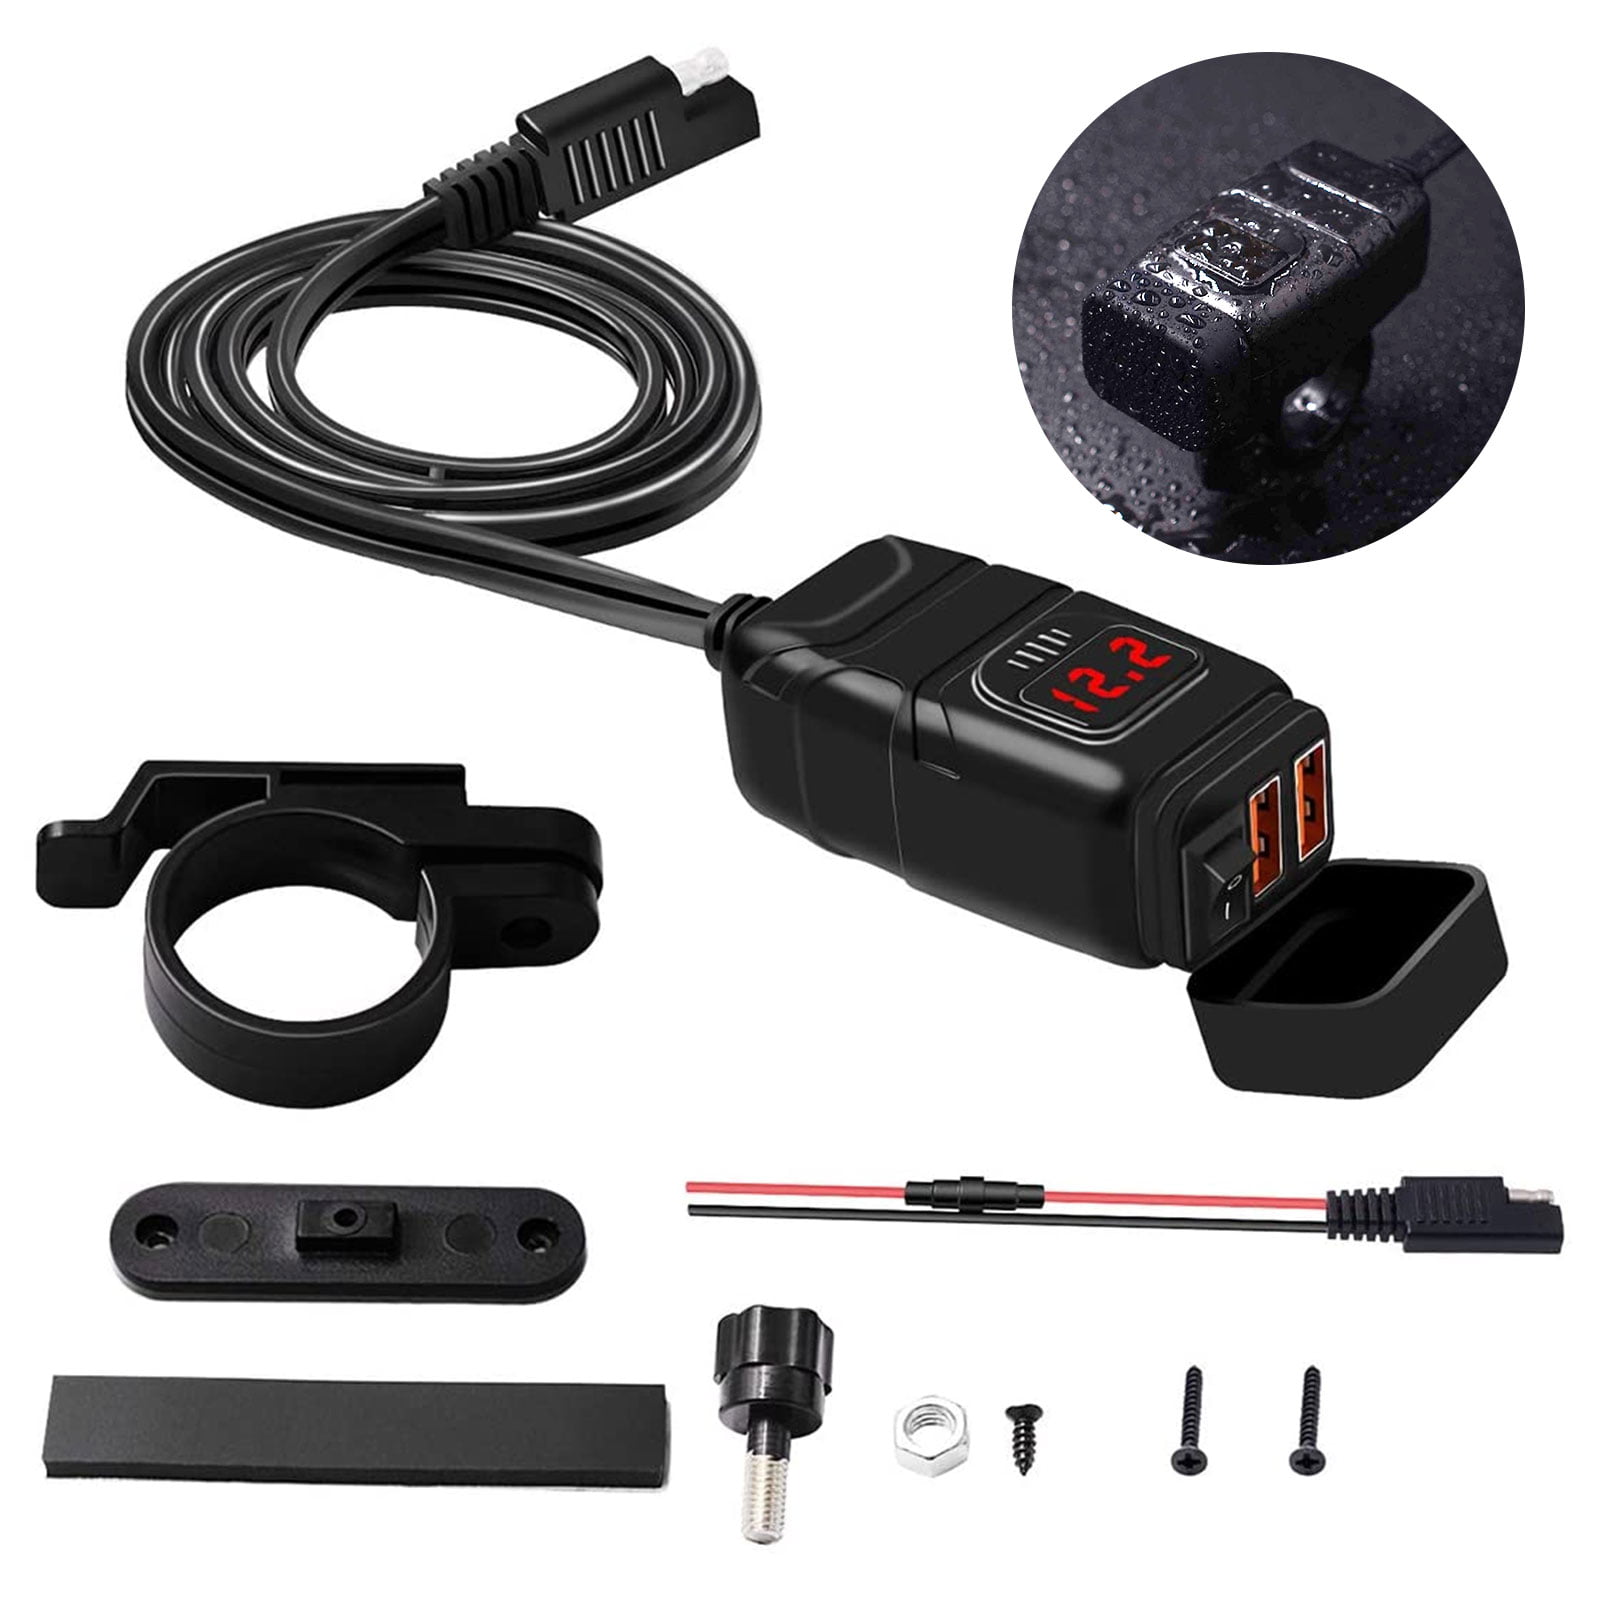 Dong Motorcycledual Usb Quick Charge 3.0 Motorcycle Charger With Voltmeter  - Waterproof, Abs, 6-30v